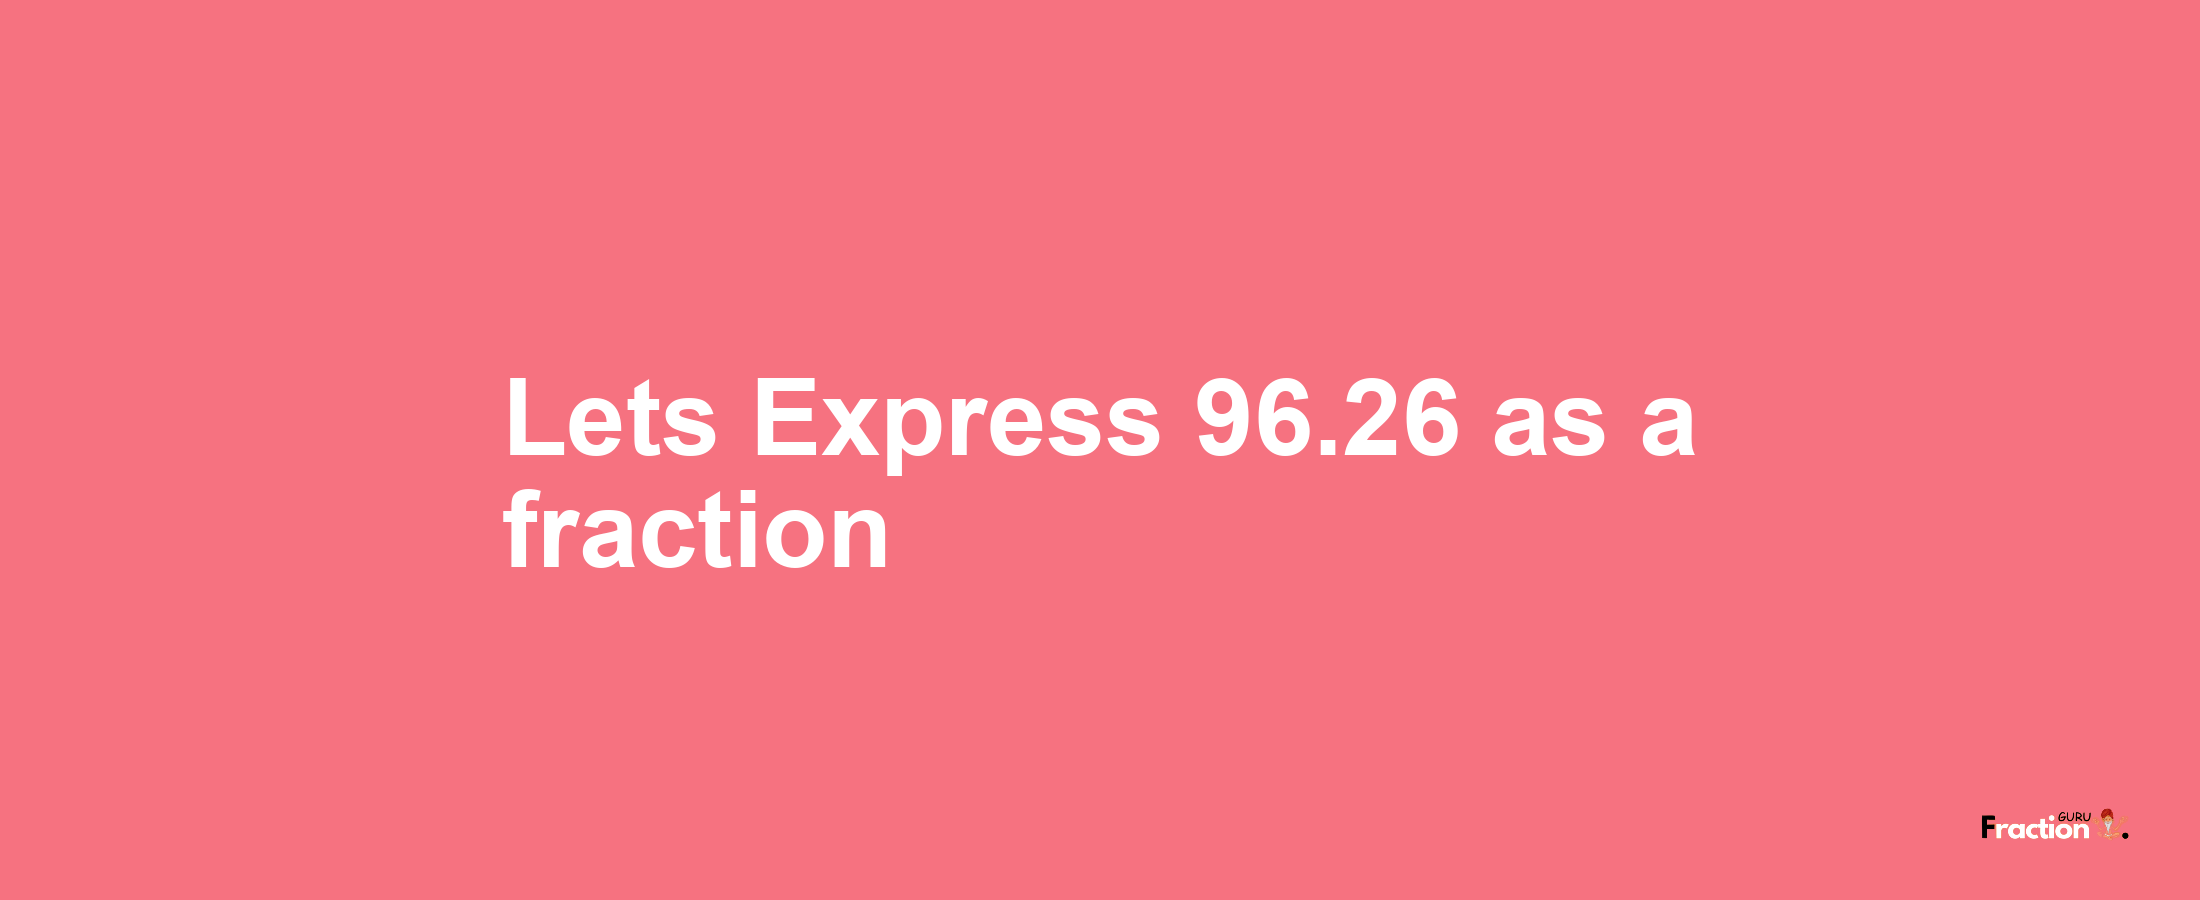 Lets Express 96.26 as afraction